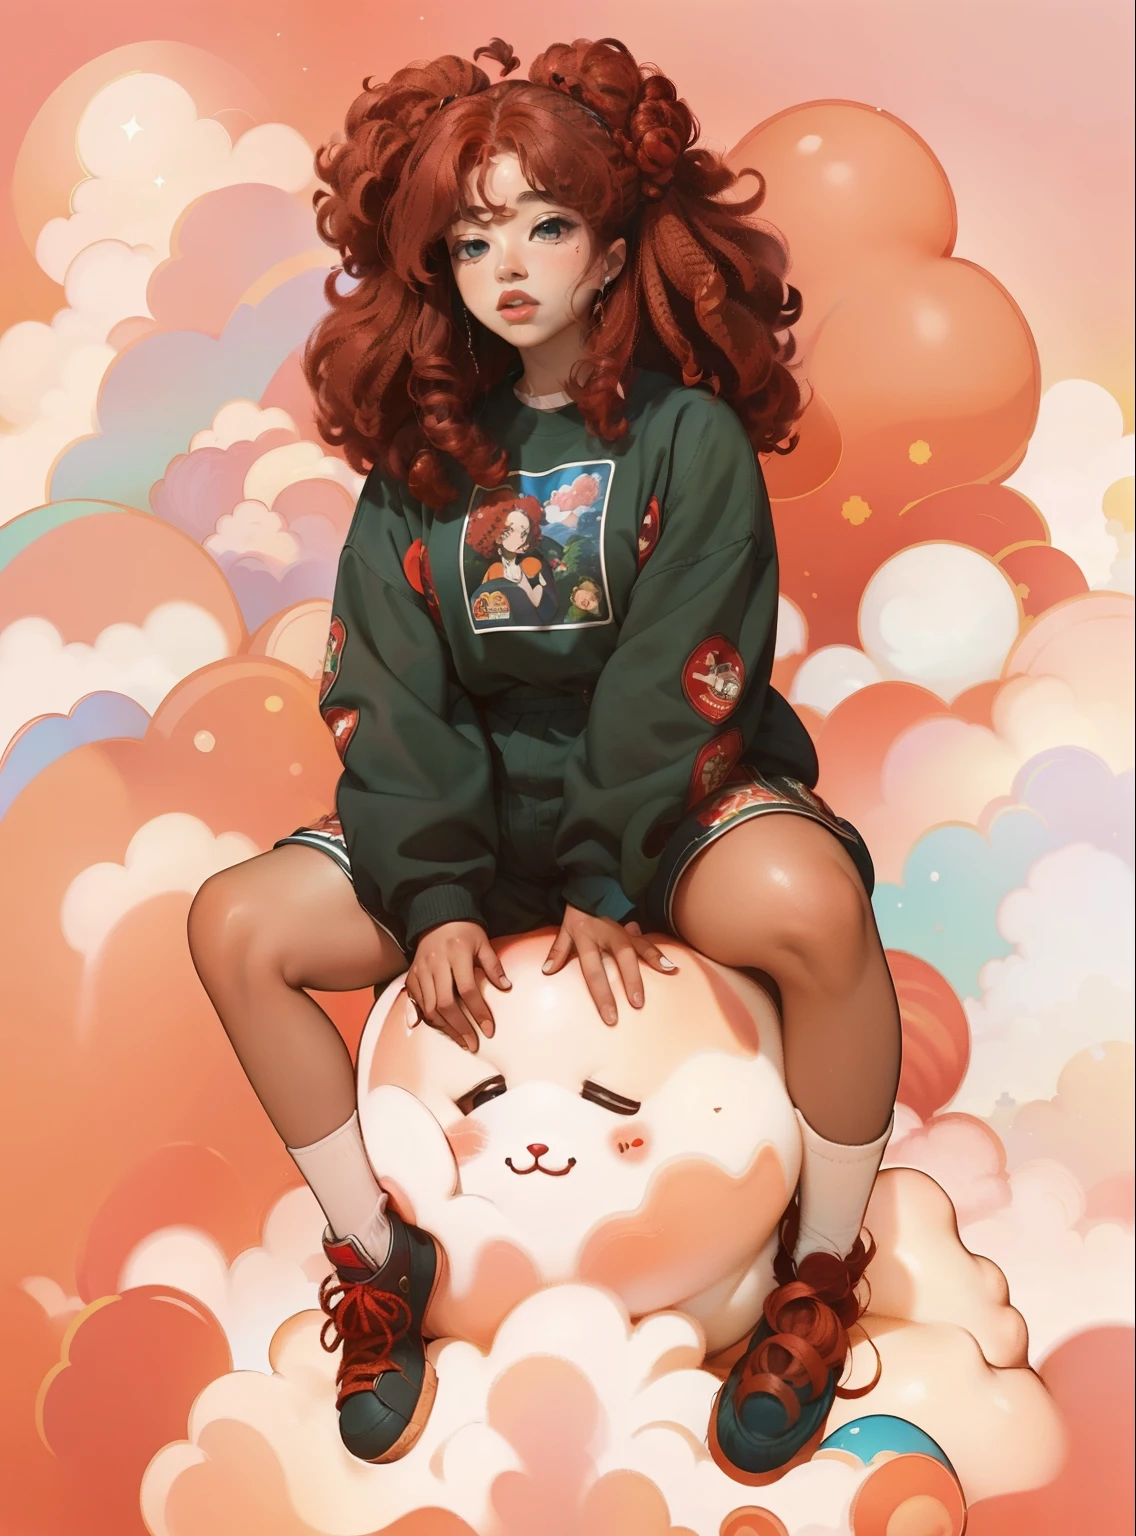 there is an African woman with red hair sitting on a cloud, sza, with curly red hair, sitting in a fluffy cloud, black girl ,clouds, red curly hair, red haired goddess, curly red hair, red afro, curly copper colored hair, she is wearing streetwear, color portrait, big red afro, cloud goddess, with red hair, red haired girl